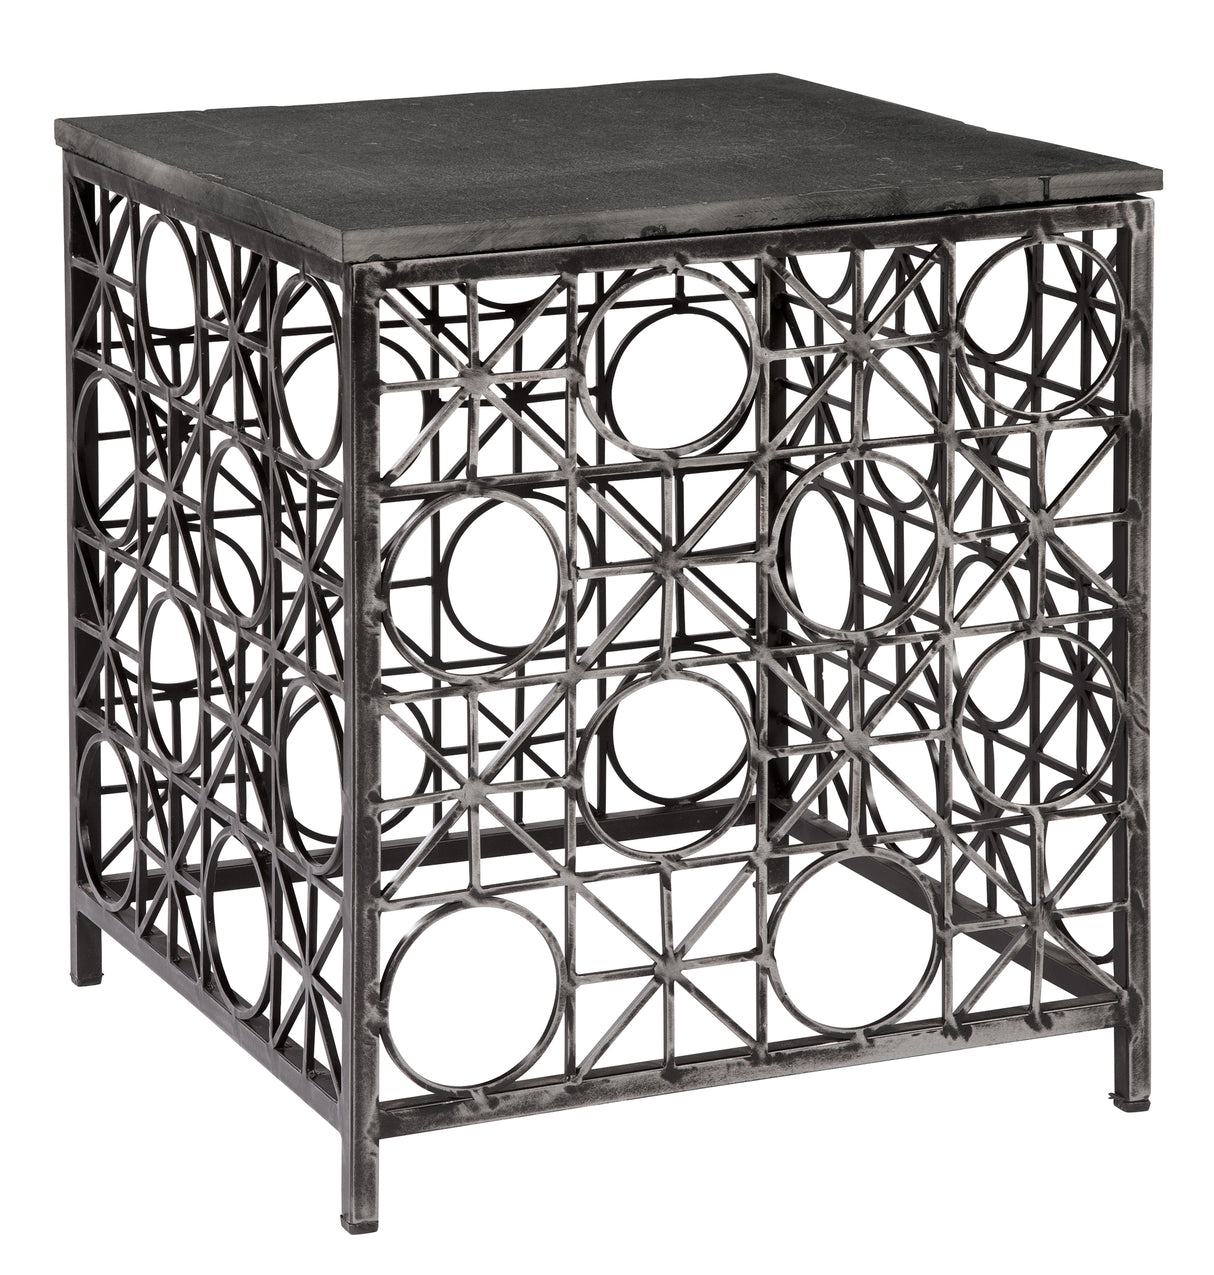 Hekman 28337 Accents 23.75in. x 23.75in. x 27.25in. End Table